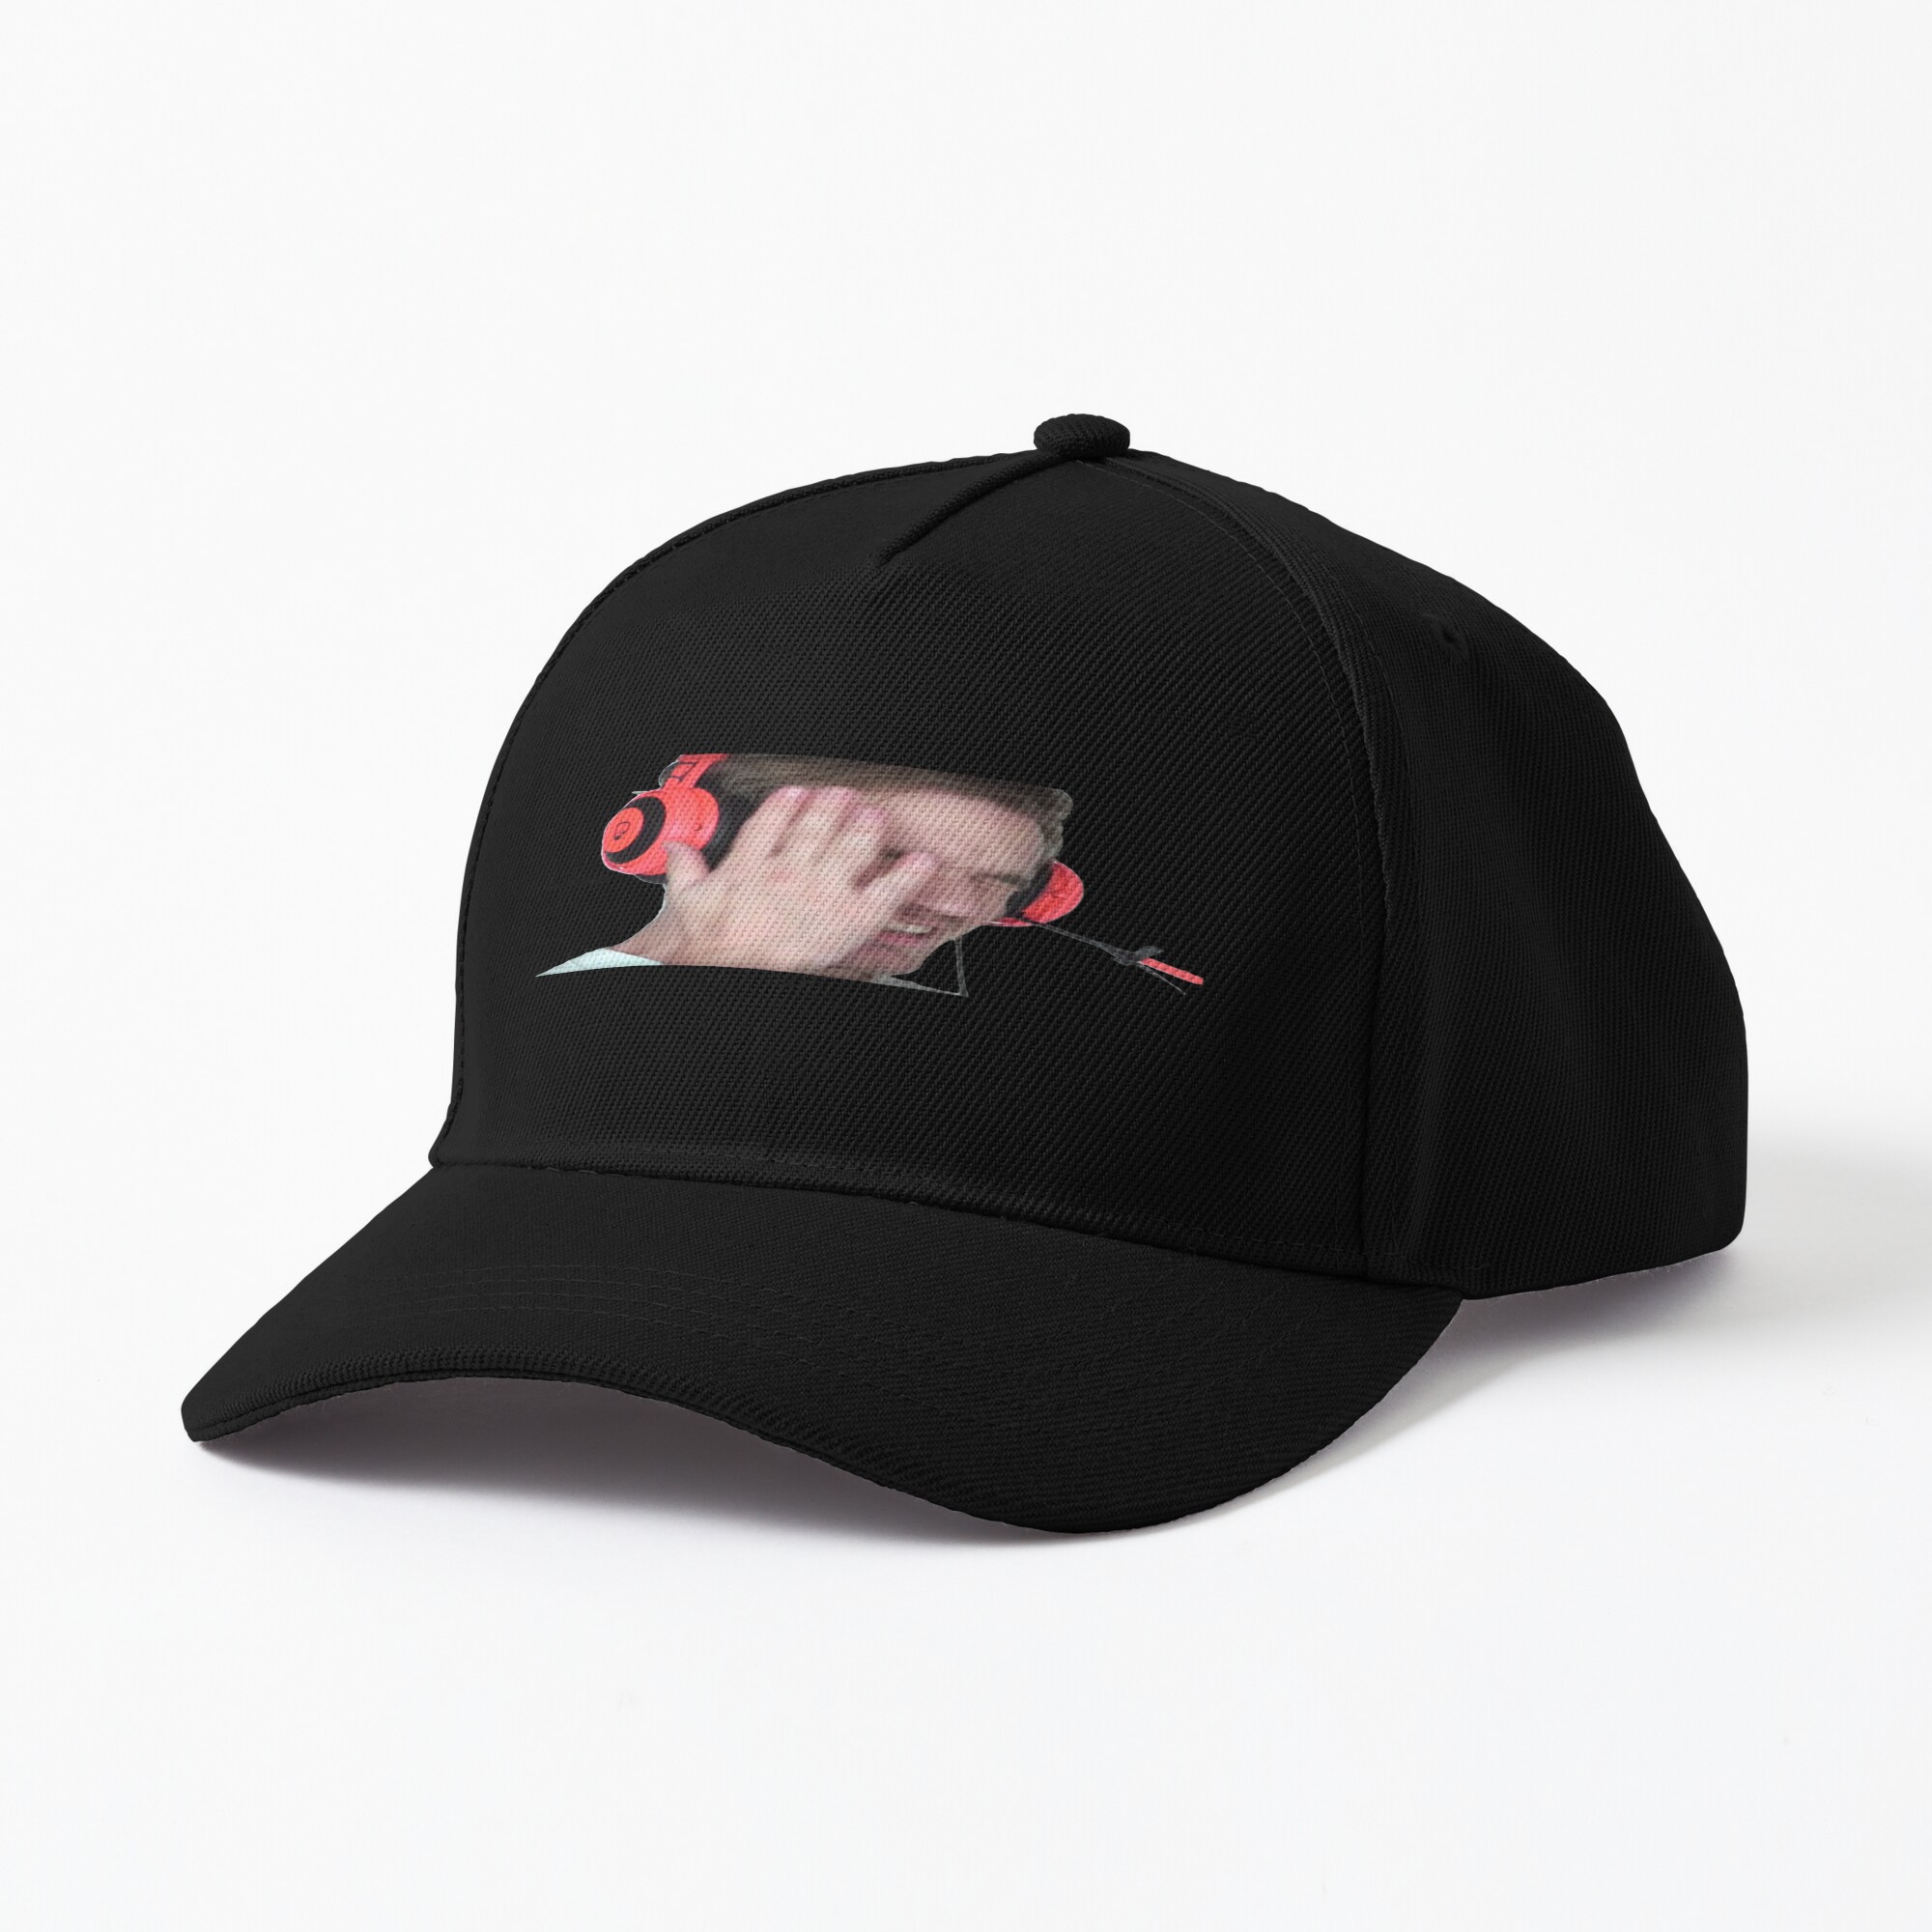 ssrcobaseball capproduct00000044f0b734a5front three quartersquare2000x2000 bgf8f8f8 4 - Pewdiepie Store